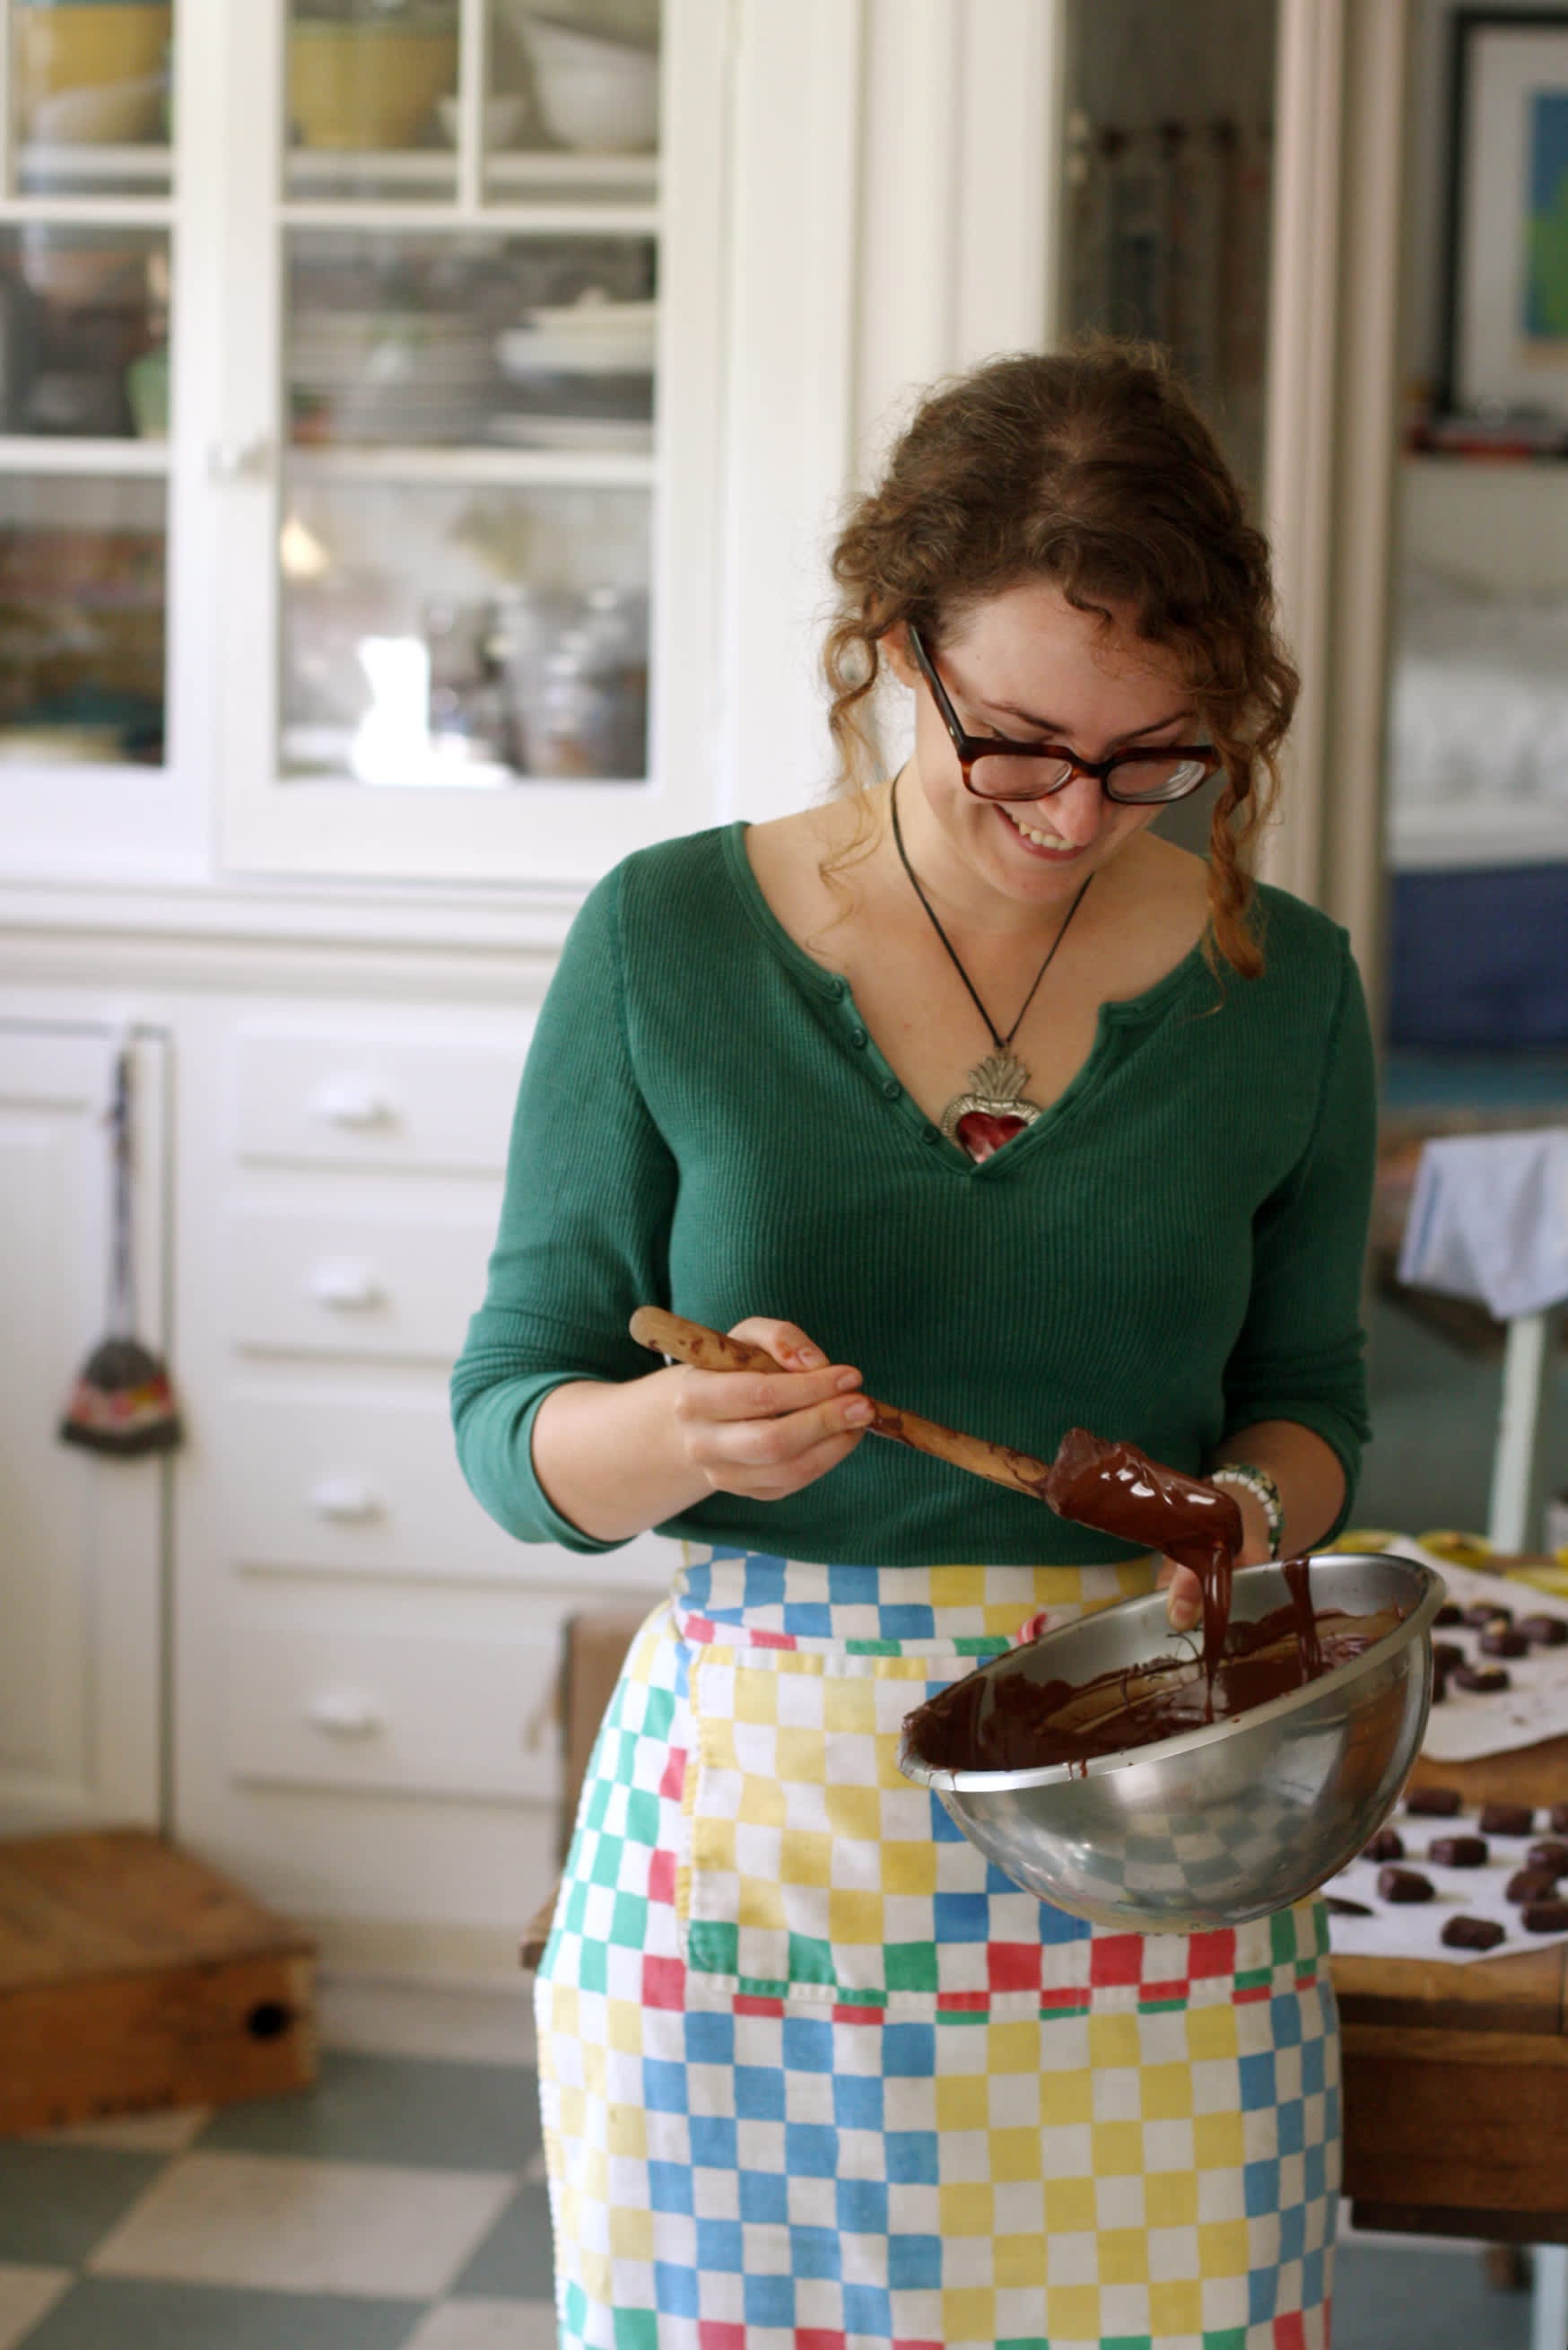 Tempering Chocolate The Easy Way (No Thermometer) - Sweet 2 Eat Baking